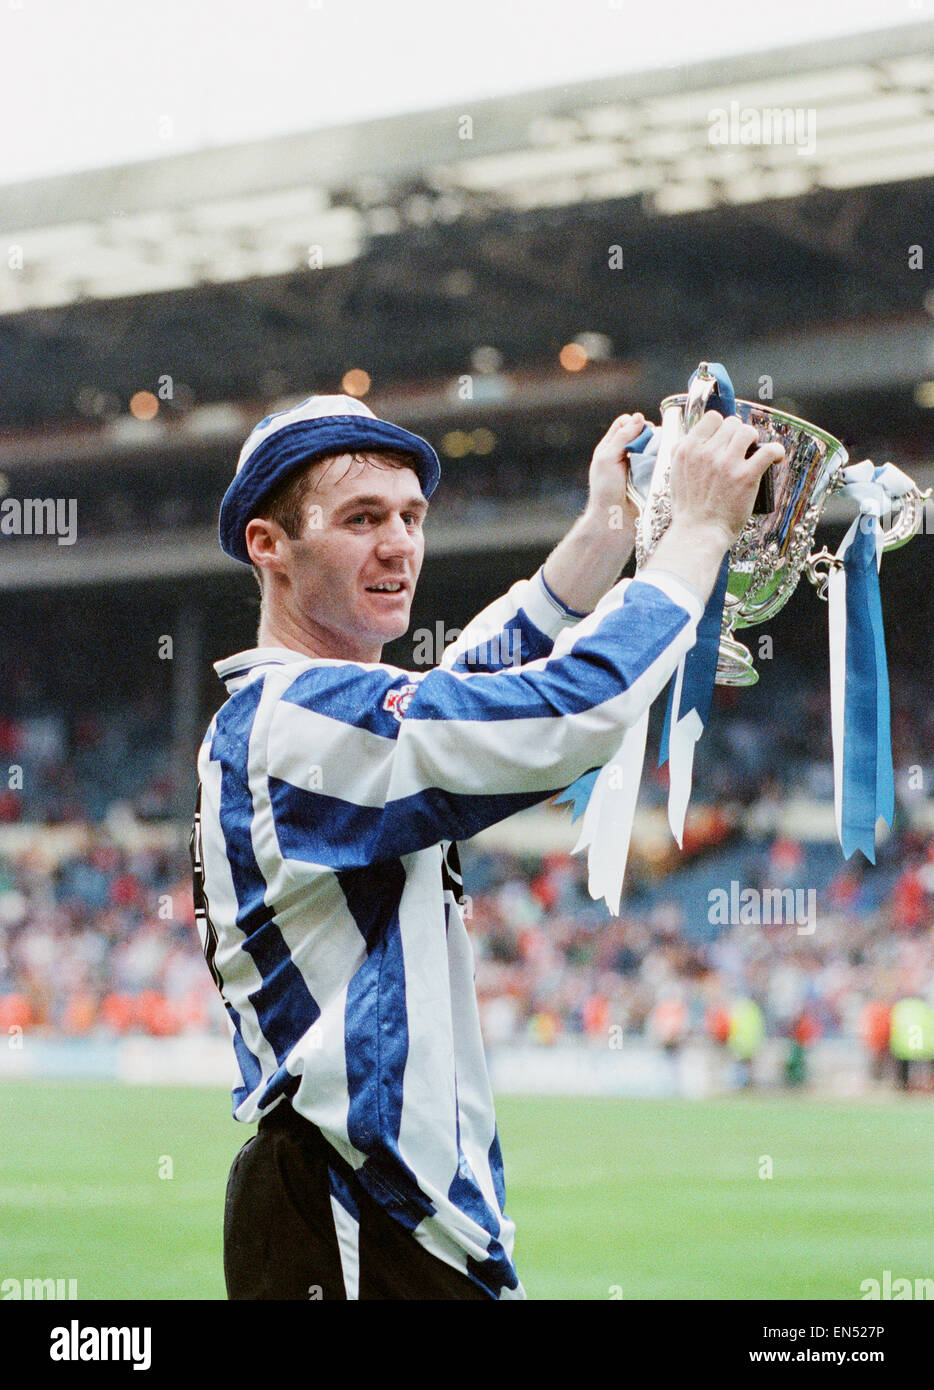 Rumbelows Cup Cup Final at Wembley Stadium. Sheffield Wednesday 1 v Manchester United 0. Wednesday's John Sheridan, who scored the winning goal, proudly holds aloft the trophy during celebrations at the end of the match. 21st April 1991. Stock Photo